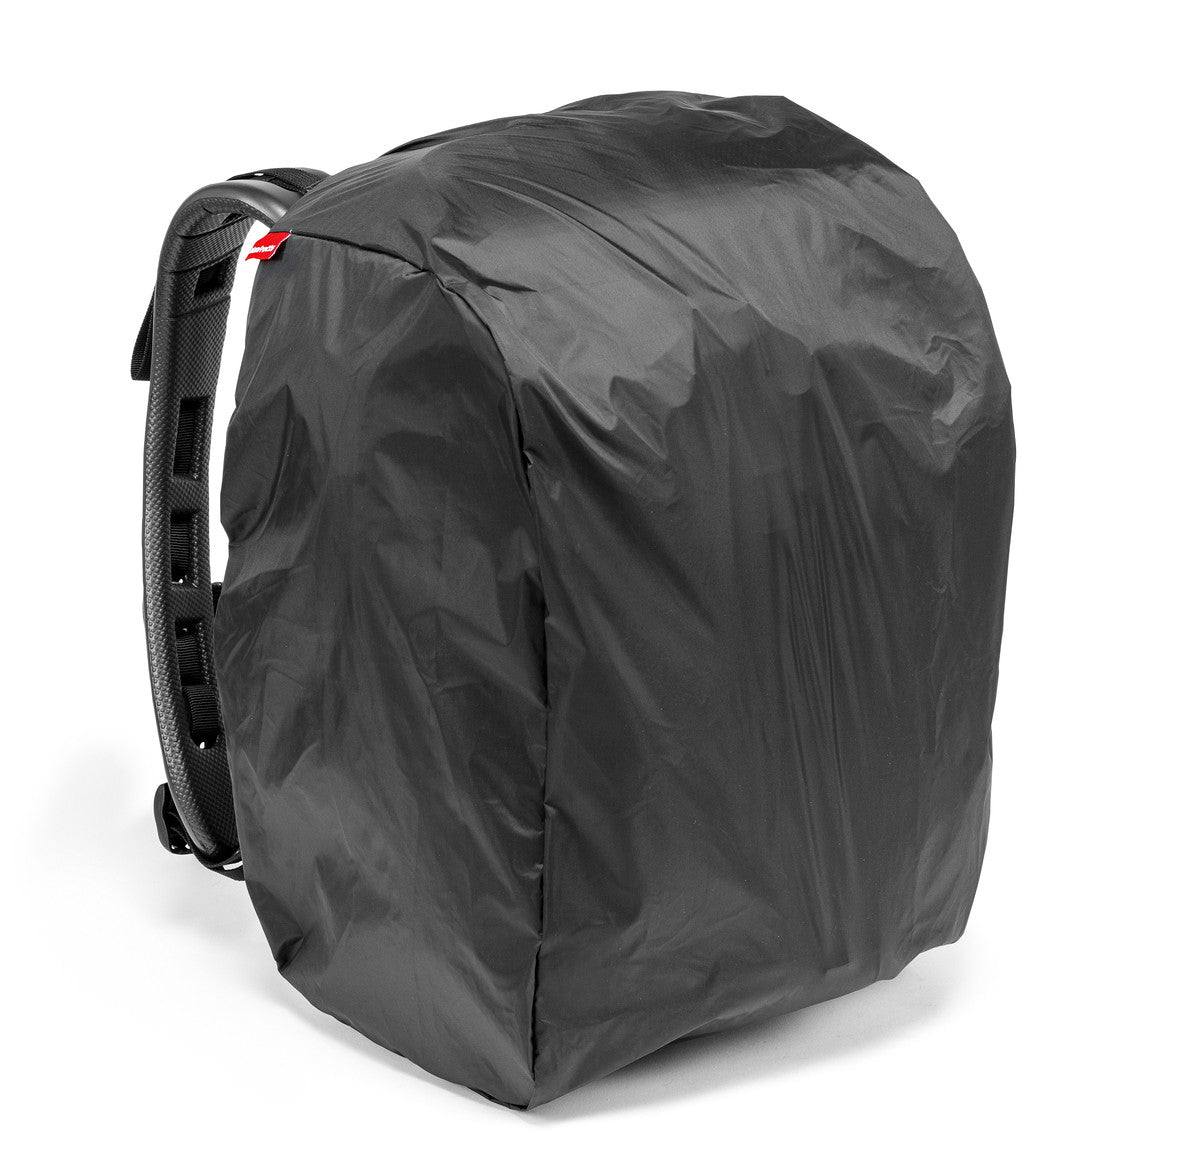 Manfrotto Multipro 120 Pro-Light Camera Backpack, bags backpacks, Manfrotto - Pictureline  - 4